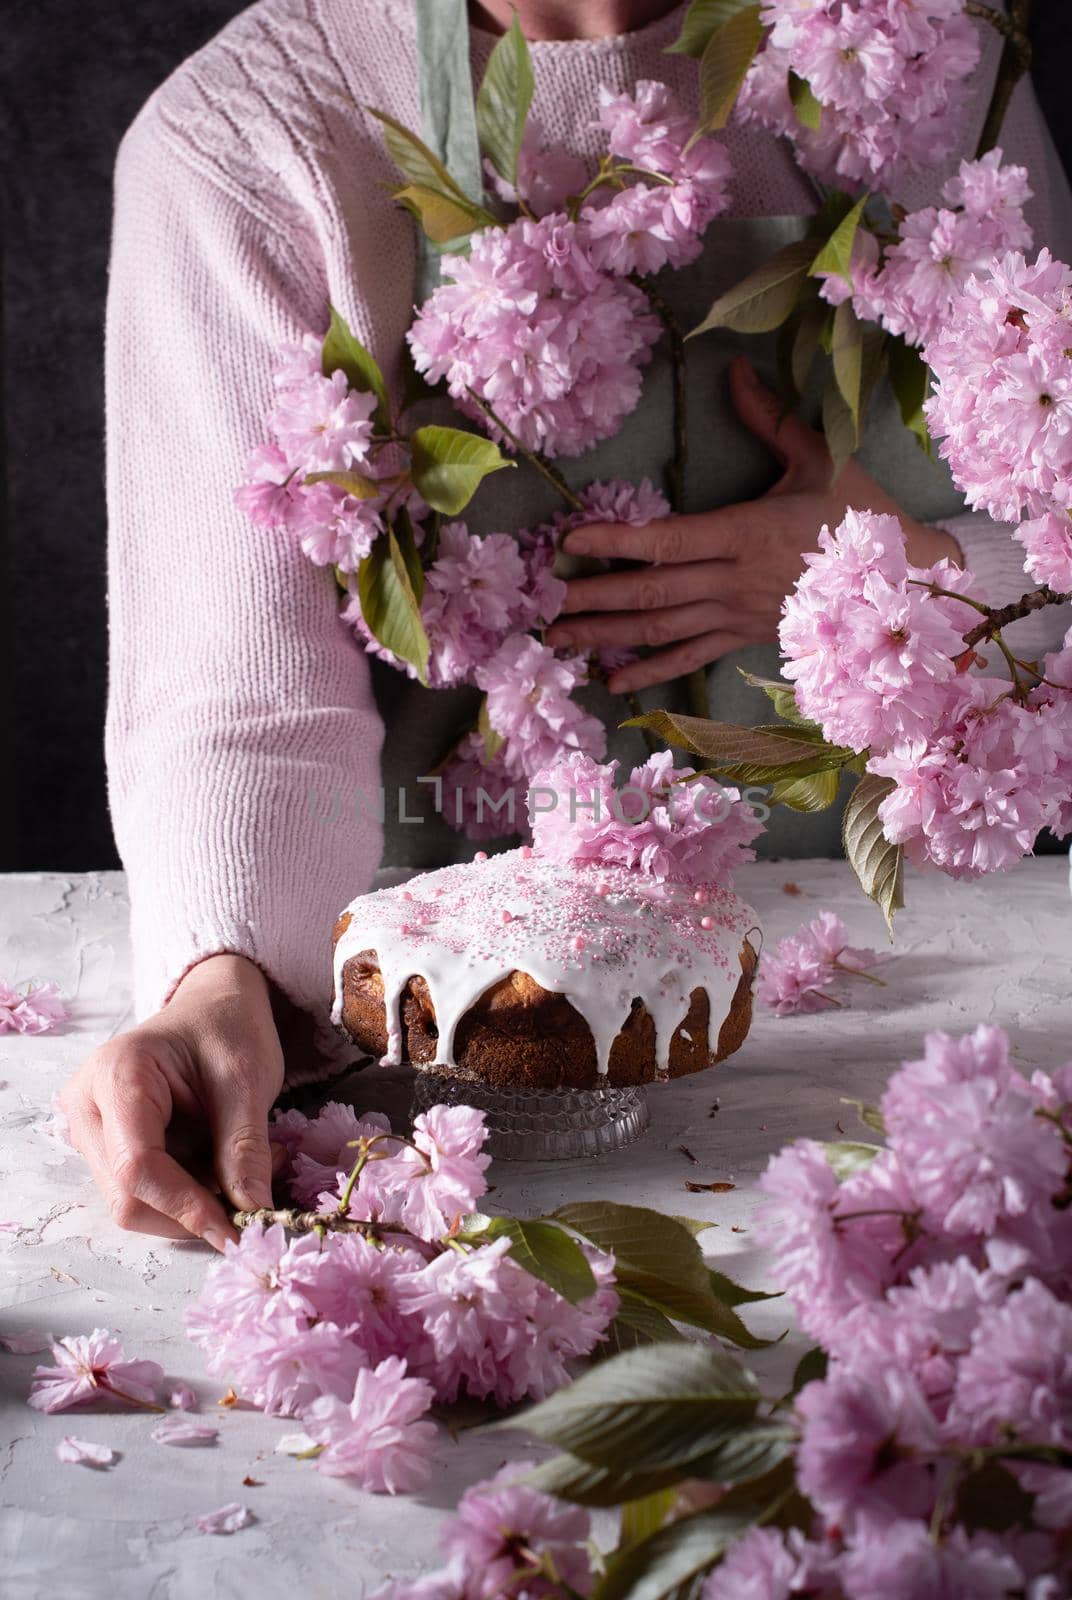 a woman decorates a homemade Easter cake with pink sakura flowers,spring blossom by KaterinaDalemans